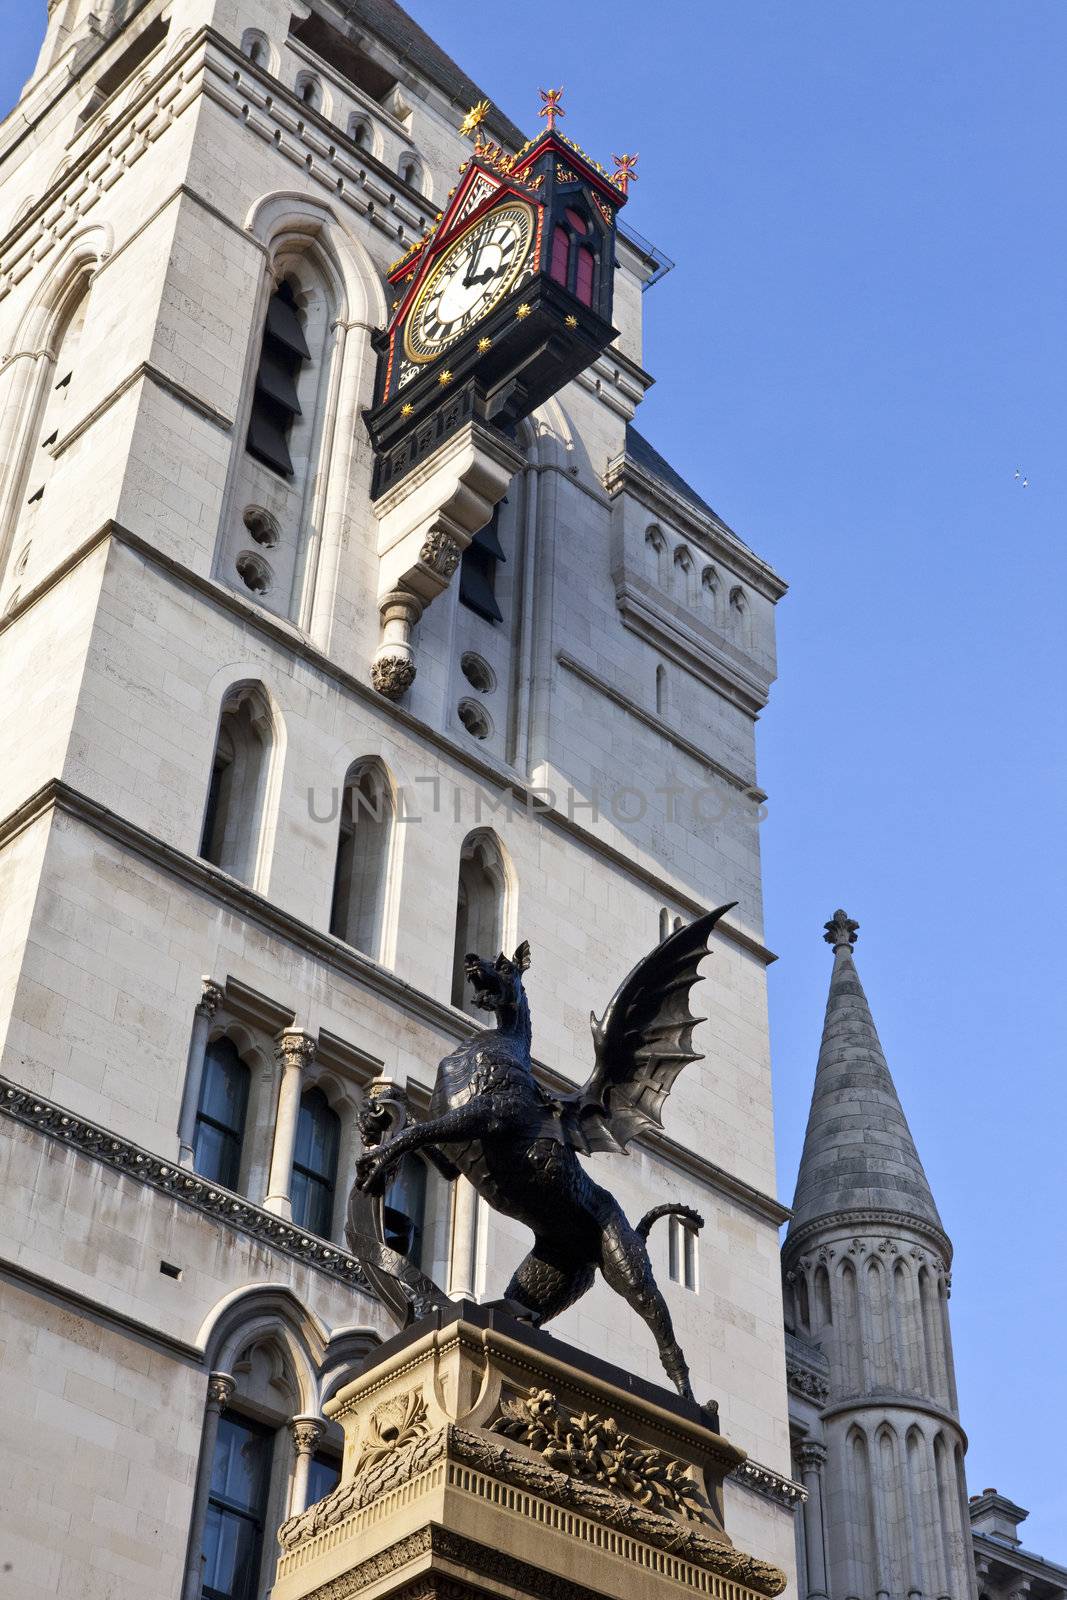 Dragon Statue Marking the Former Site of Temple Bar situated in front of the Royal Courts of Justice in London.